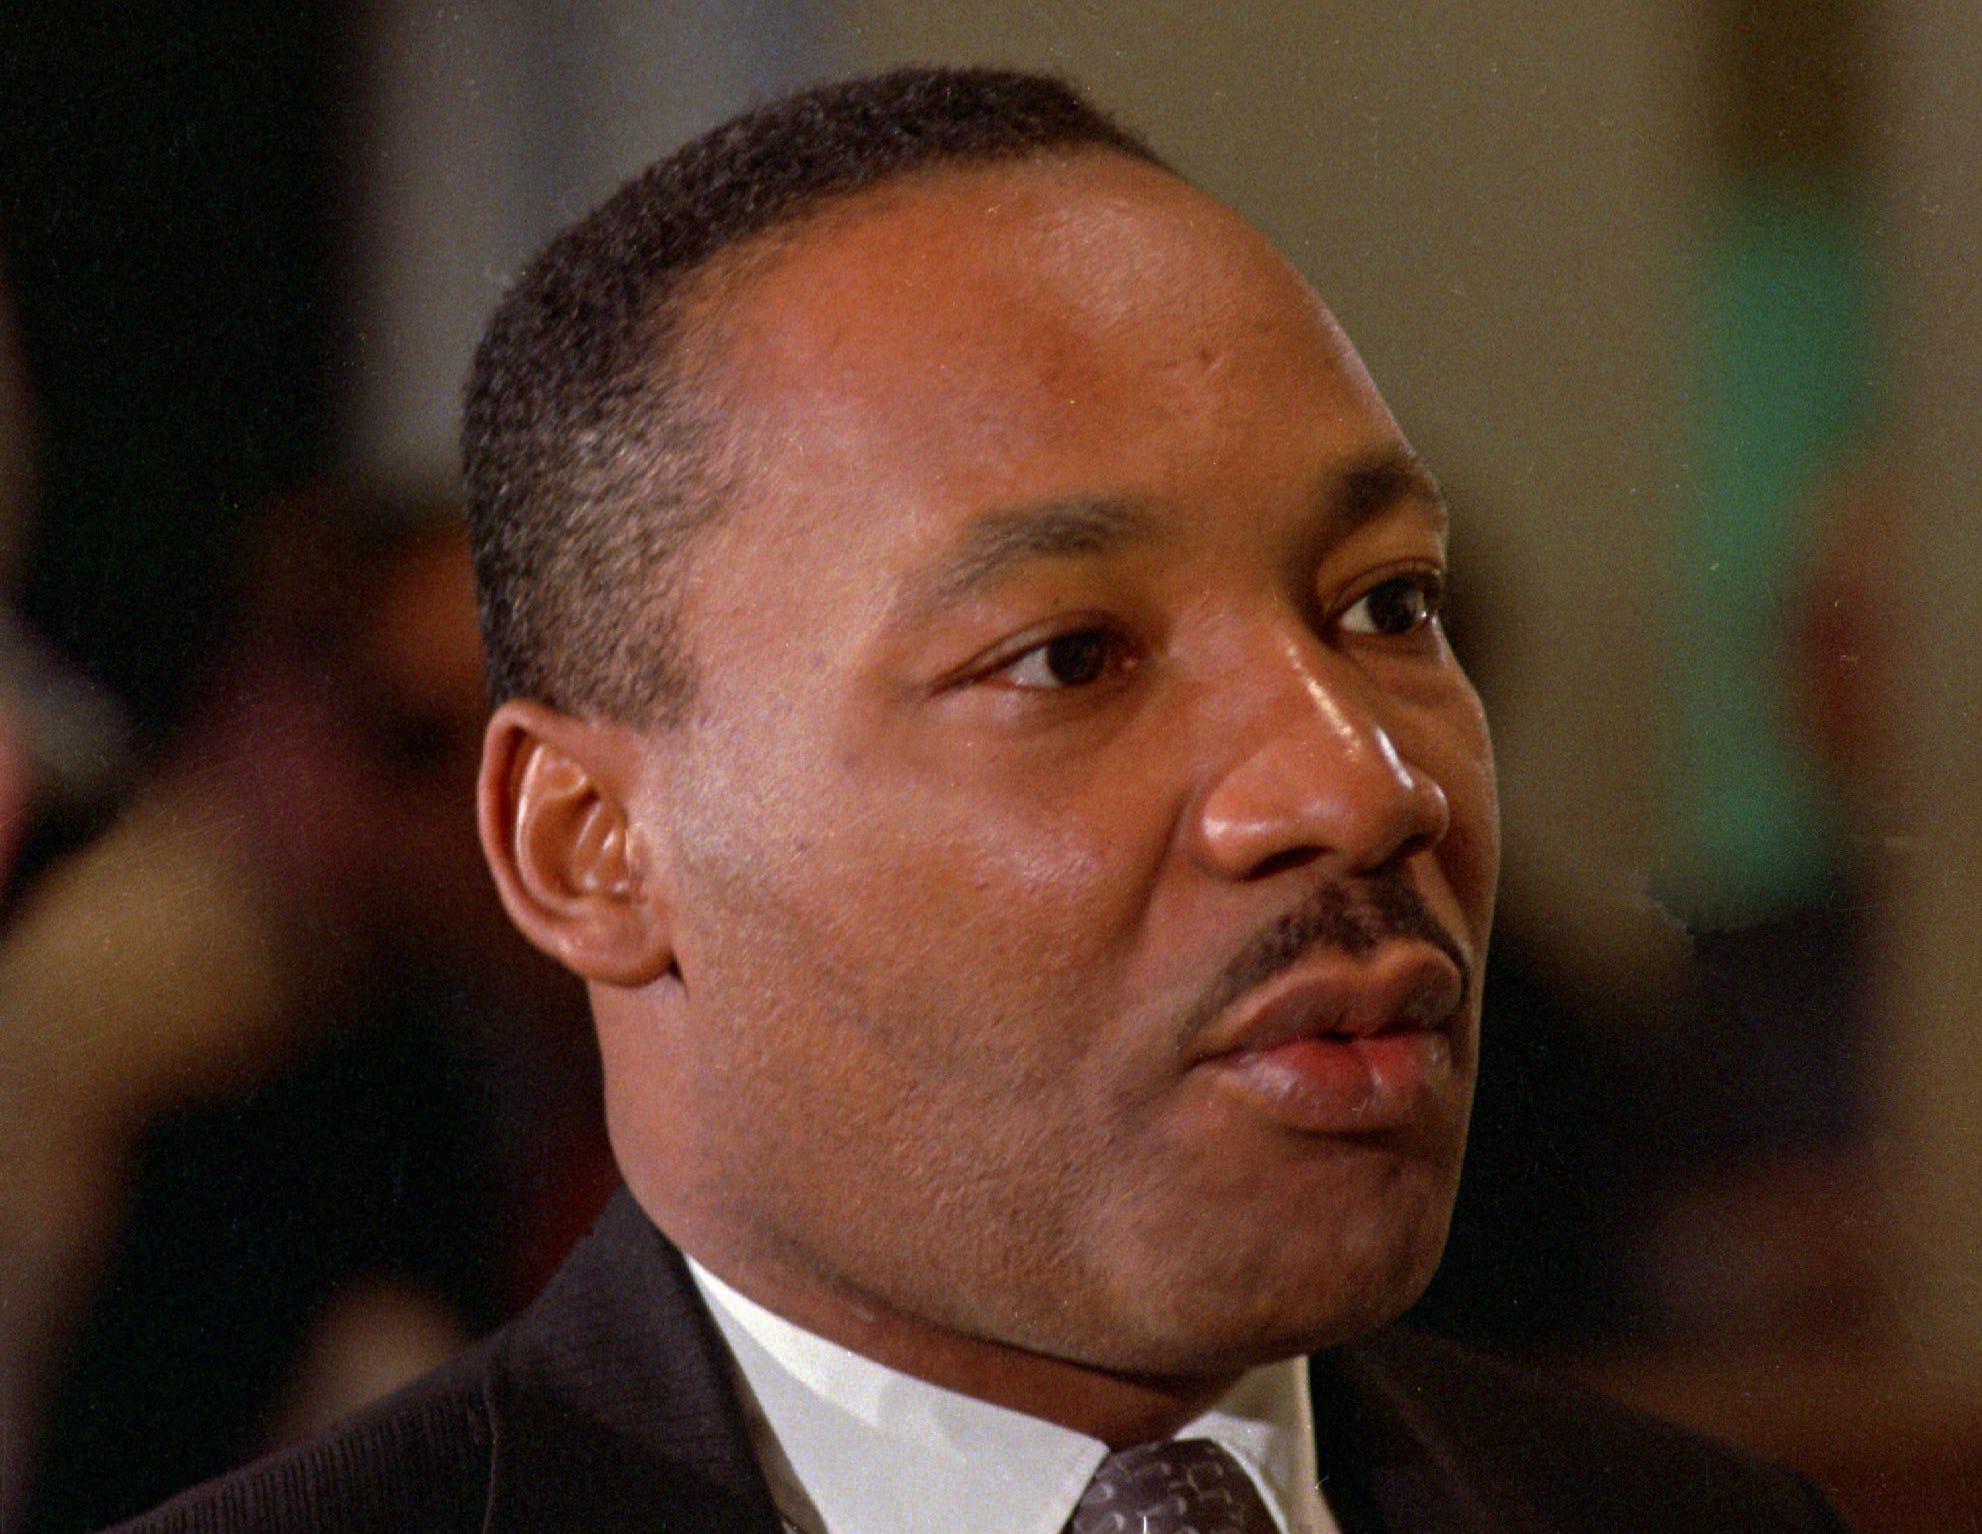 Inside the last 32 hours of Martin Luther King Jr.'s life